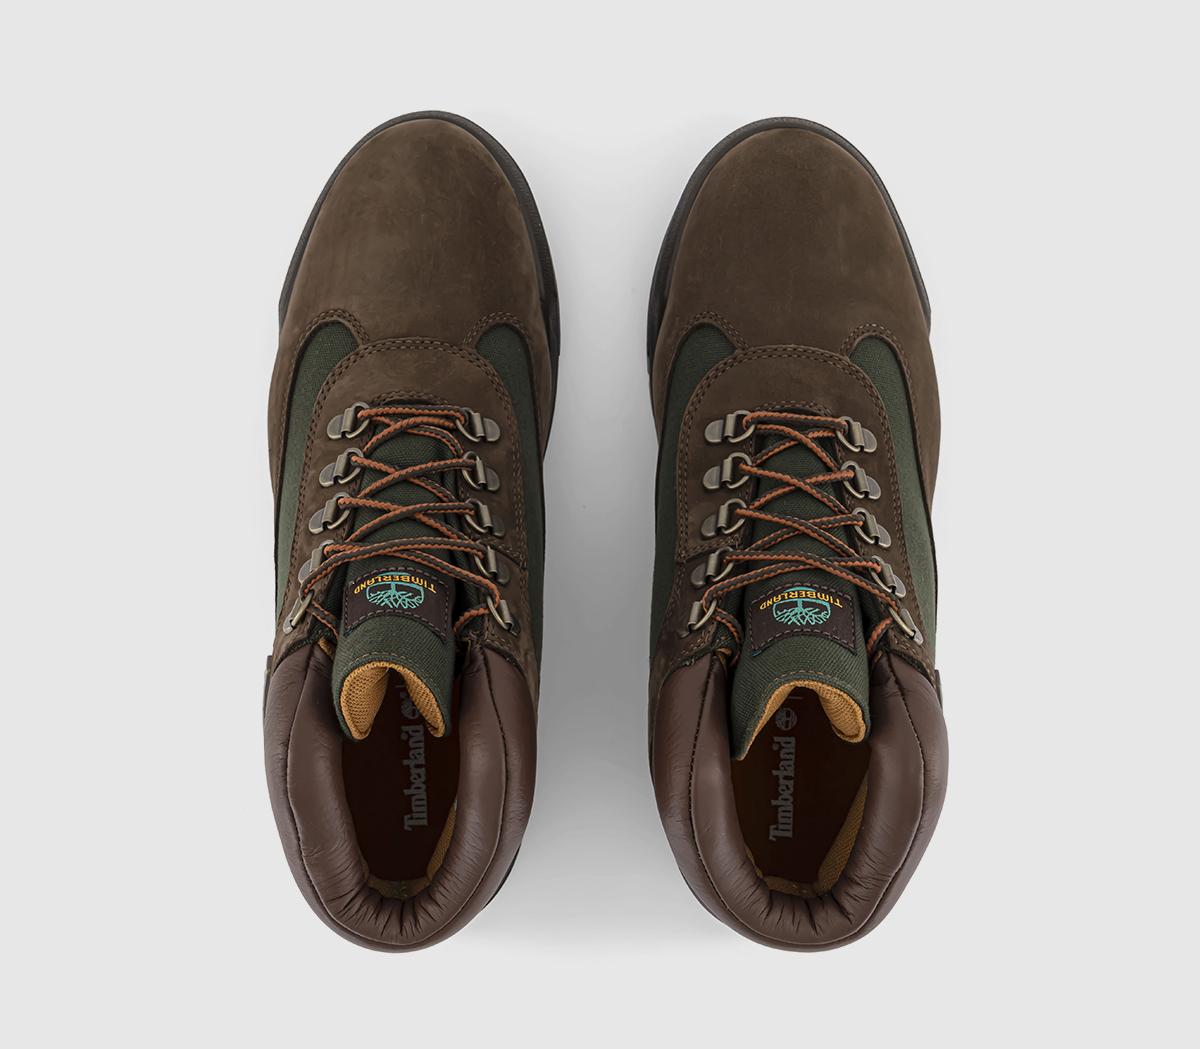 Timberland Field Boot Mid Lace Up Beef And Broccoli - Men’s Boots